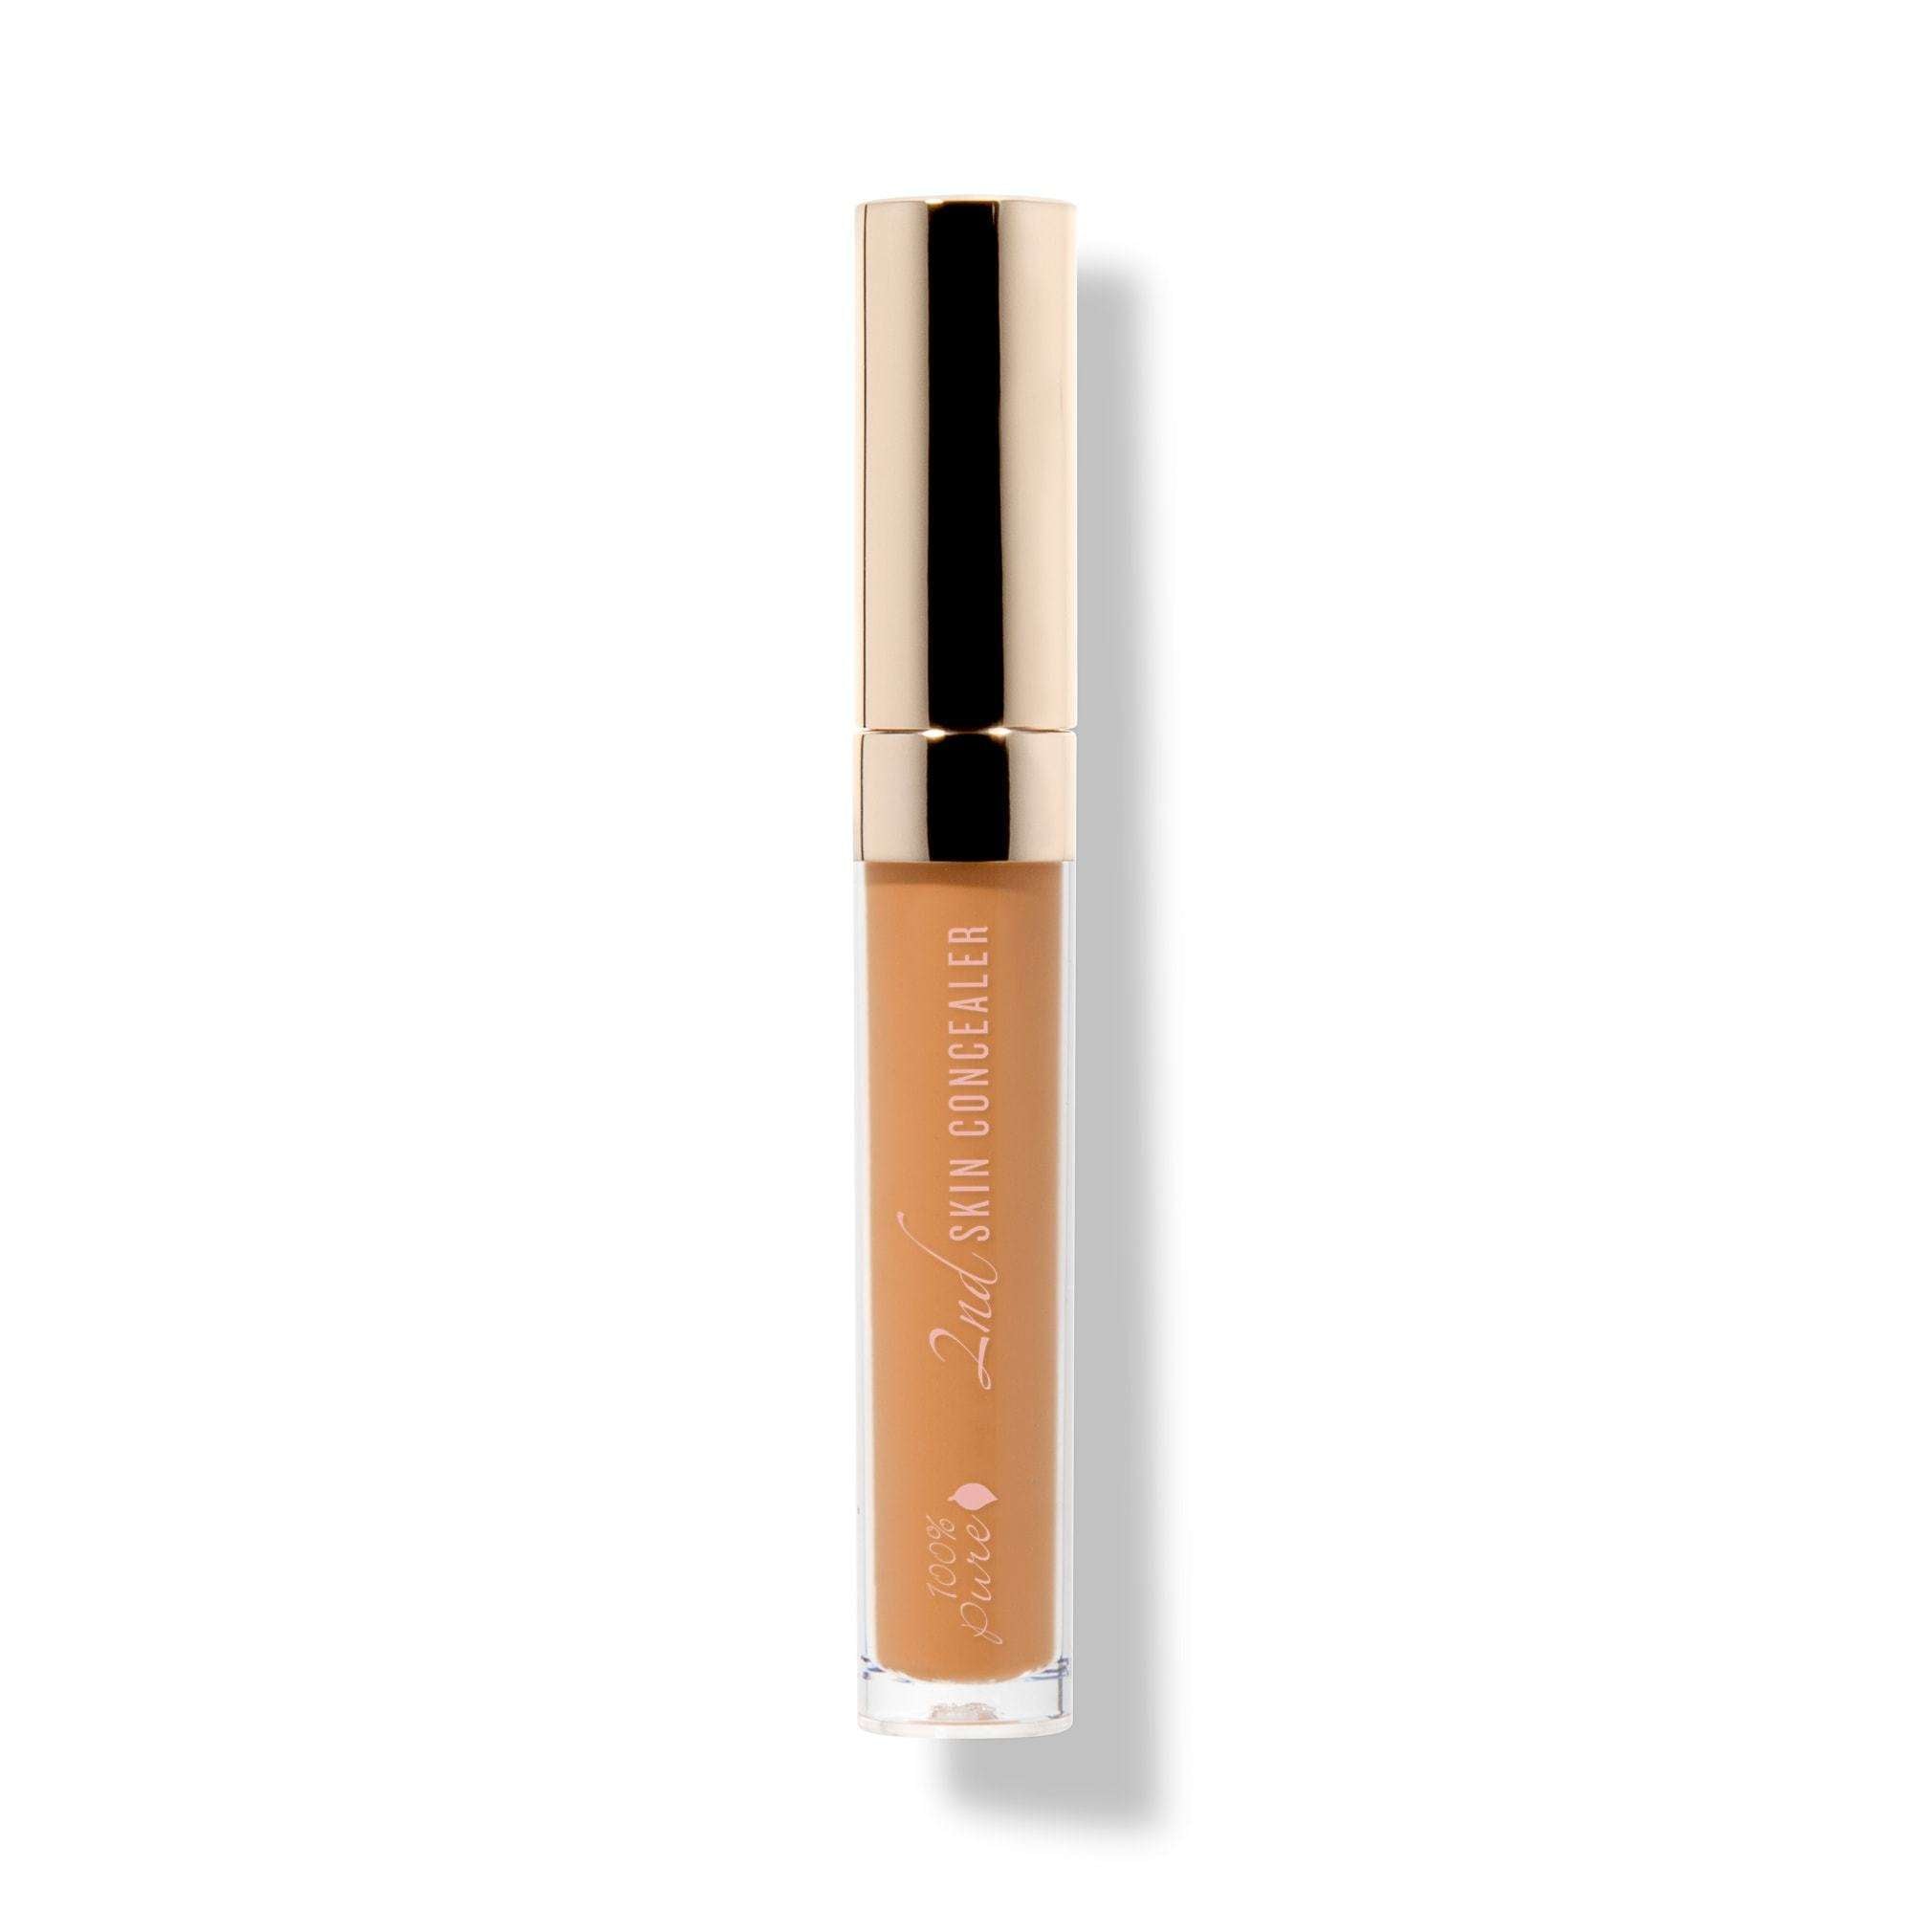 100% Pure® Fruit Pigmented® 2nd Skin Concealer, Shade 5